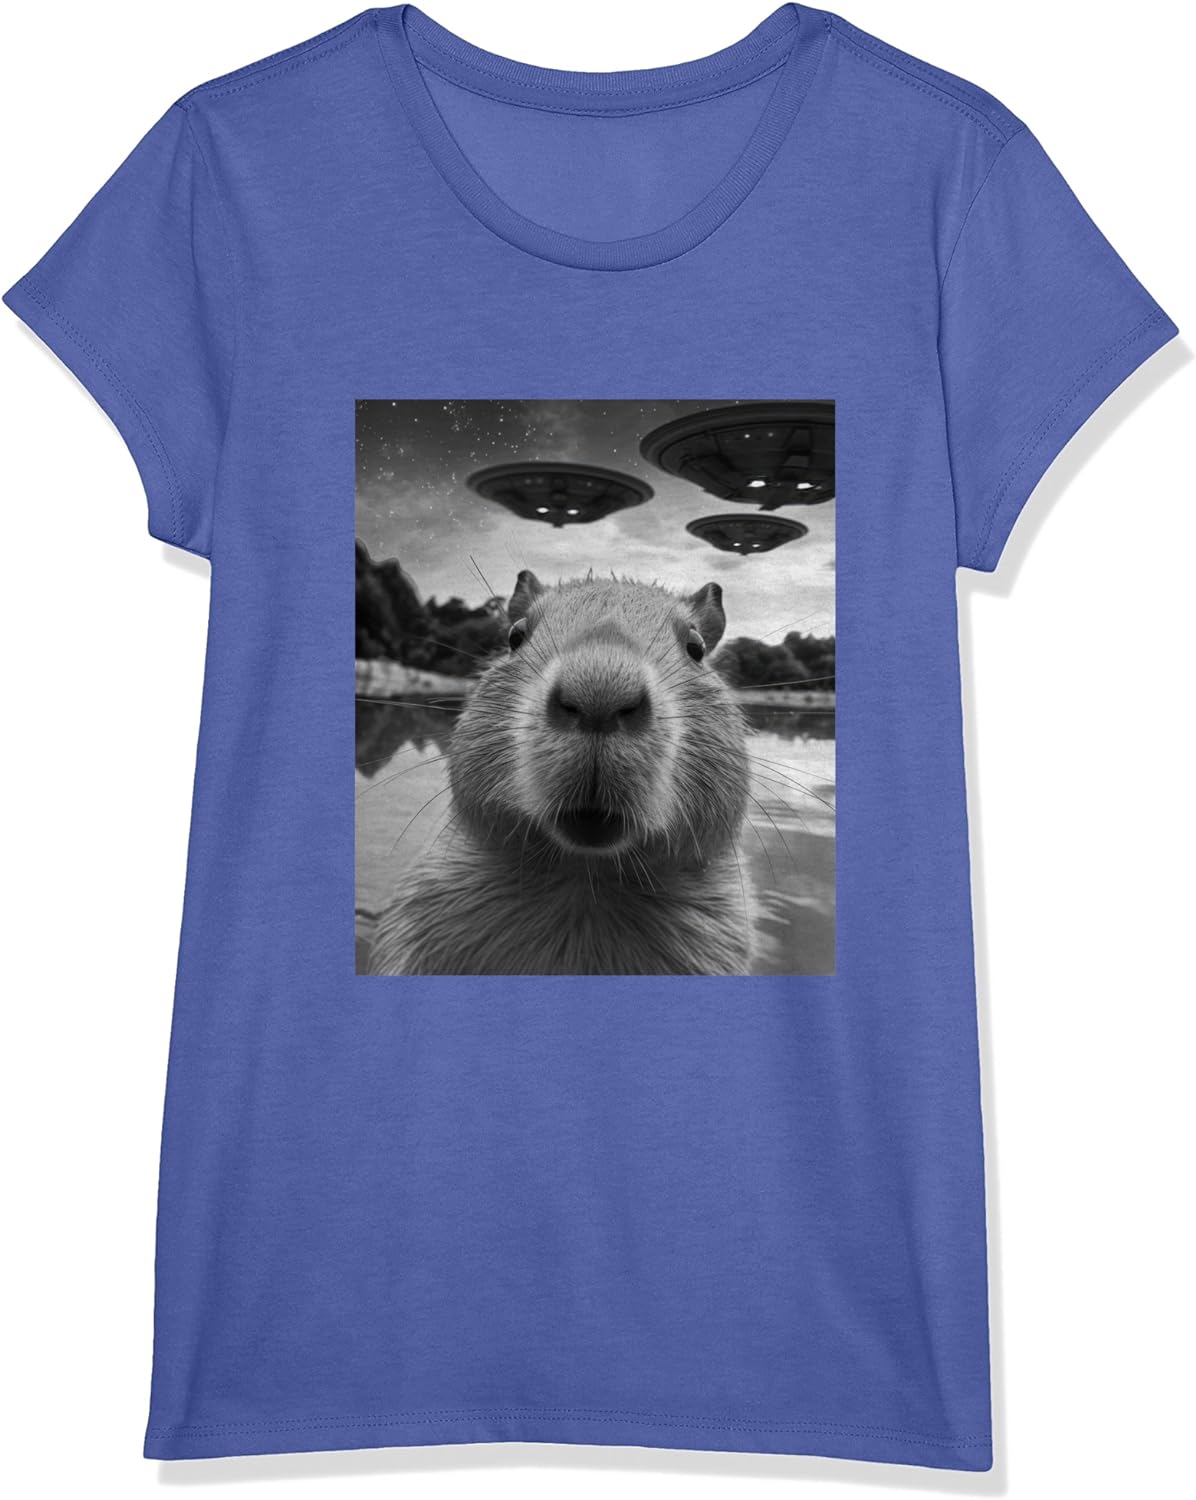 Funny Graphic Tee Capybara Selfie with UFOs Weird T-Shirt Review